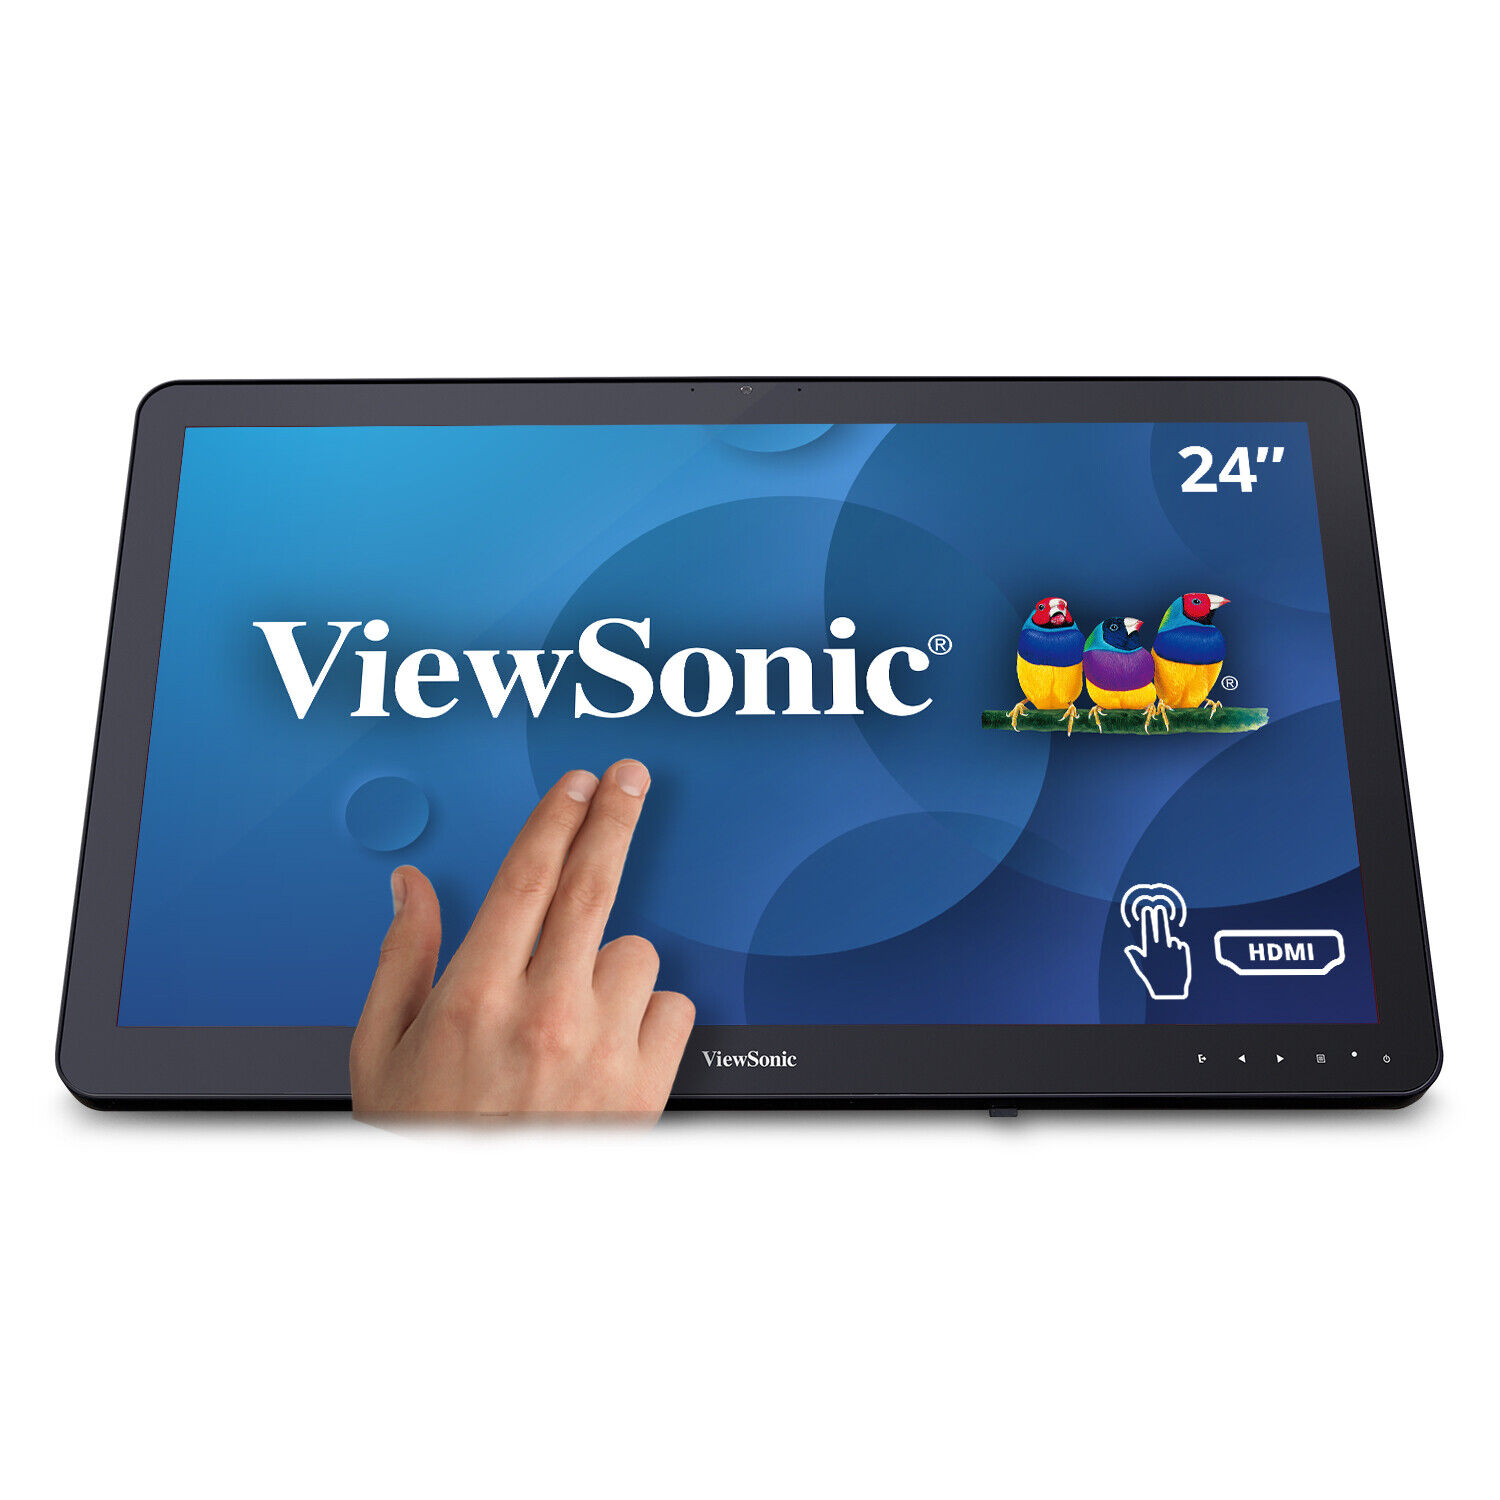 ViewSonic TD2430 24in 1080p 10-Point Multi Touch Screen Monitor HDMI,